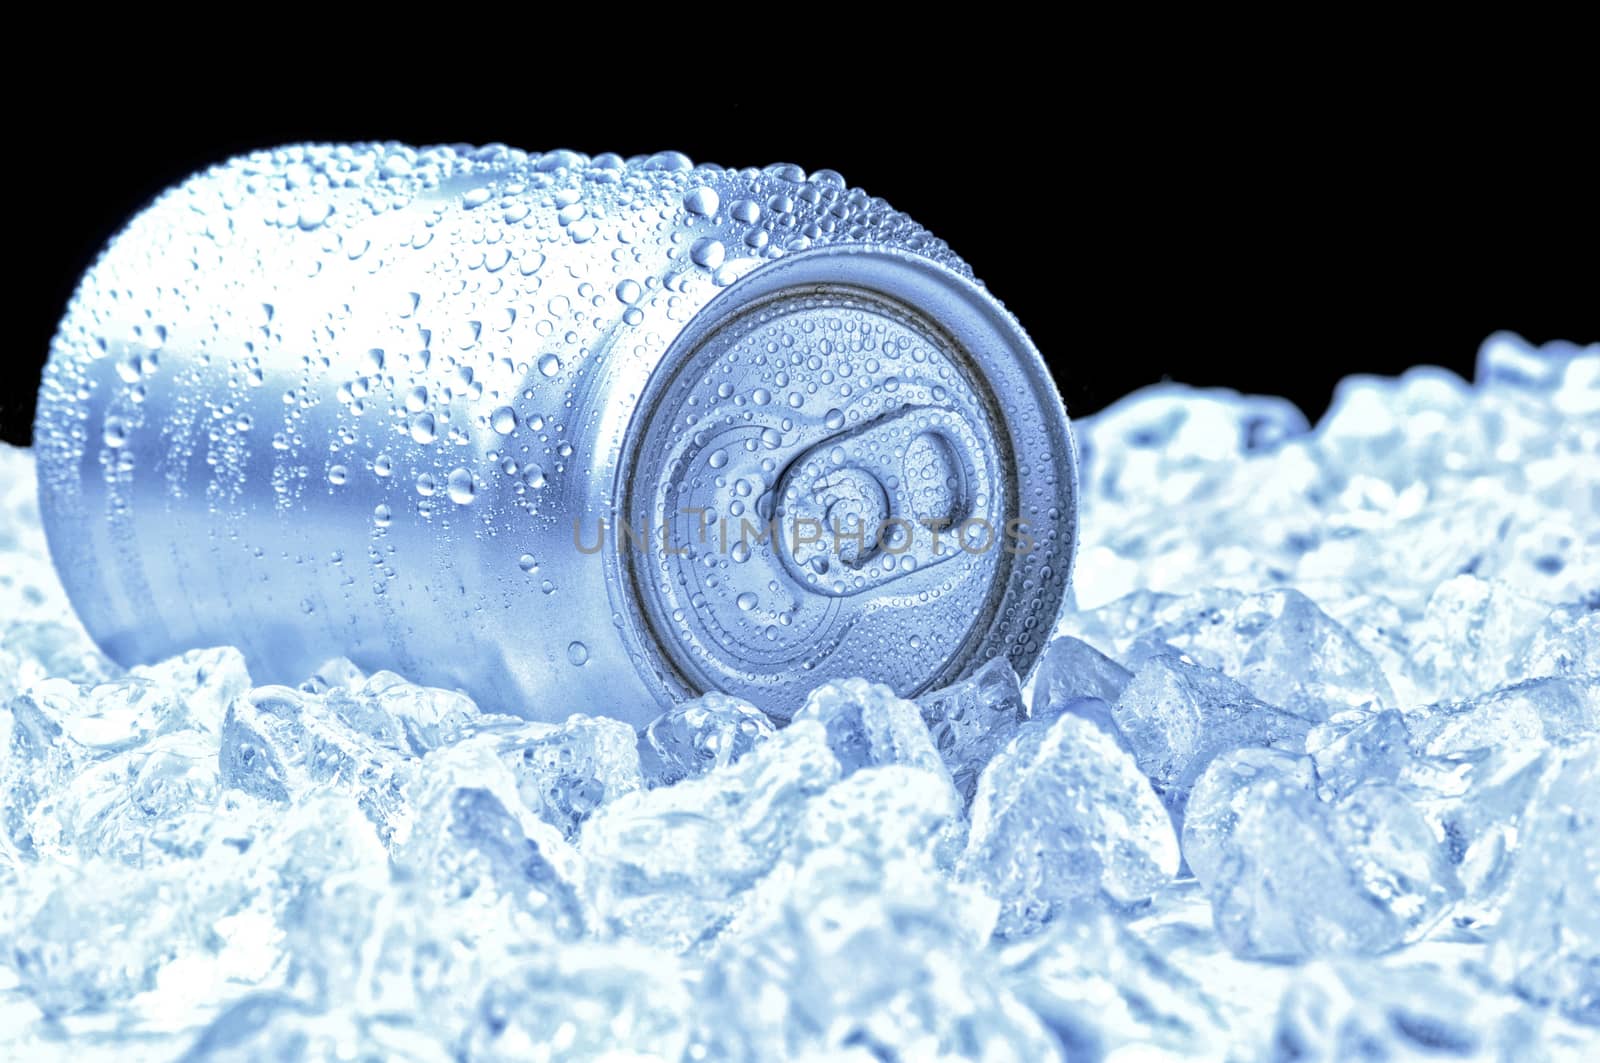 Aluminum Drink Can with water droplets laying in a bed of ice - black background and cool tones